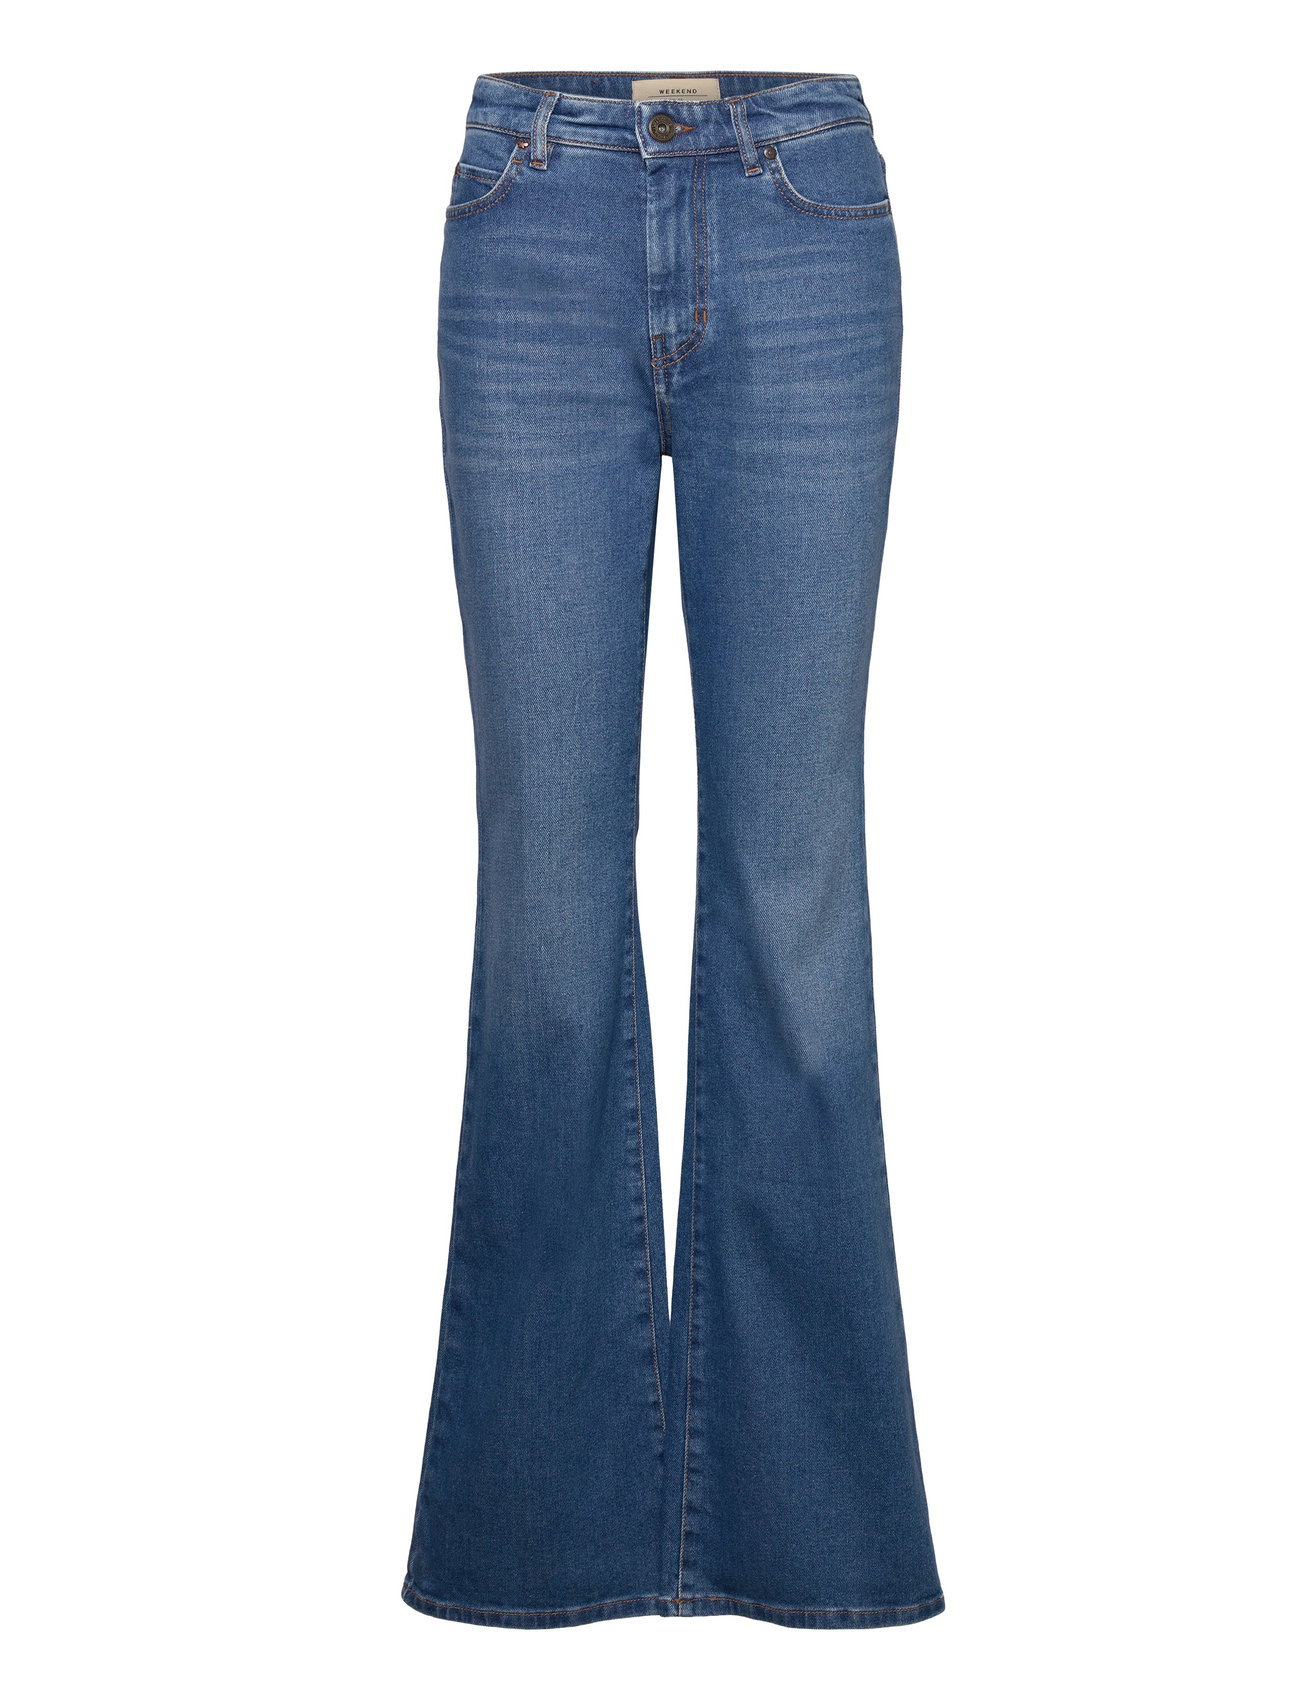 Palo Bottoms Jeans Flares Blue Weekend Max Mara